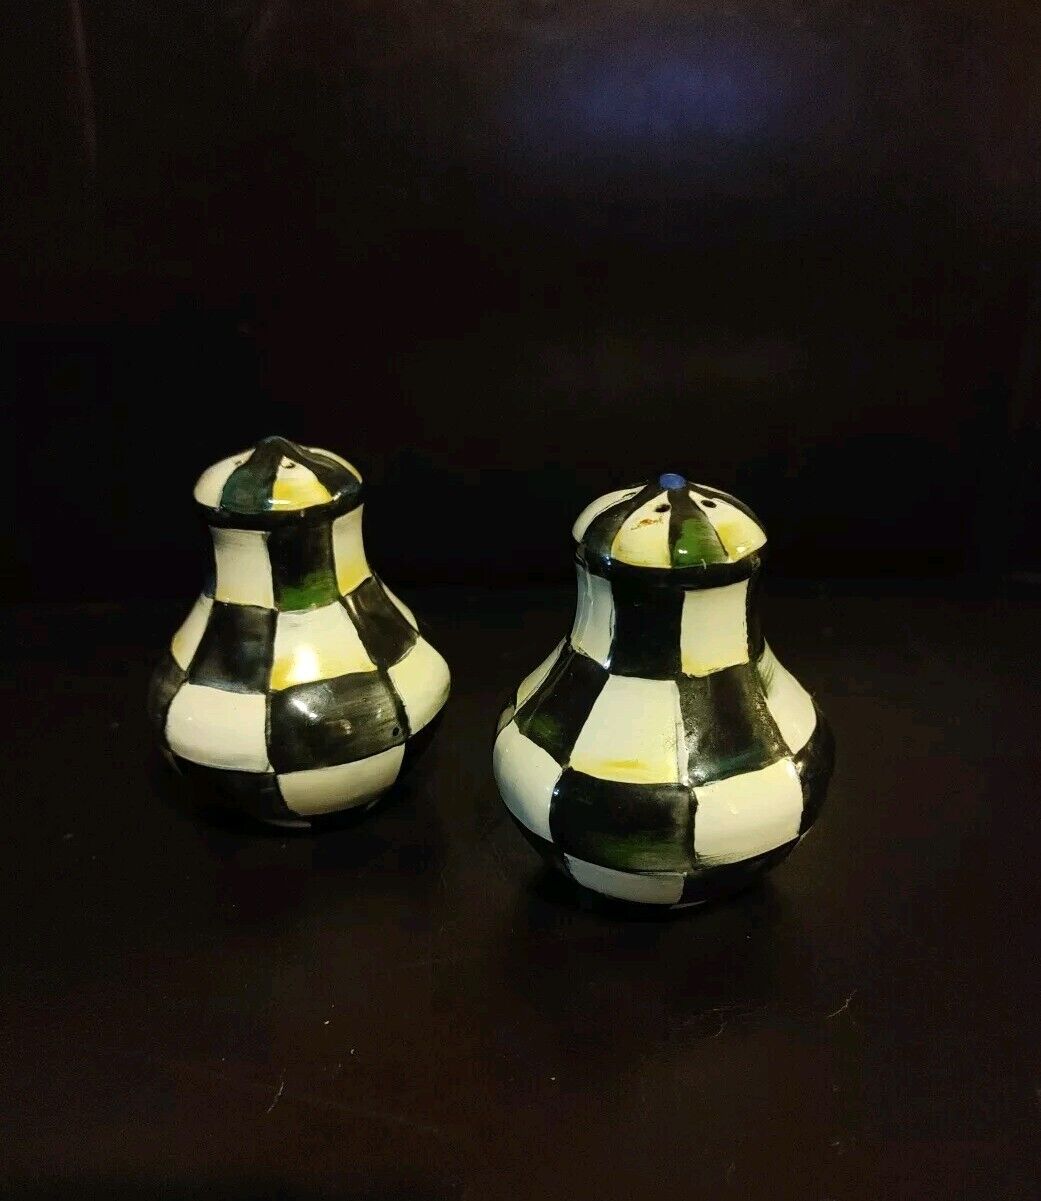 Mackenzie-Childs Courtly Check Salt & Pepper Shakers